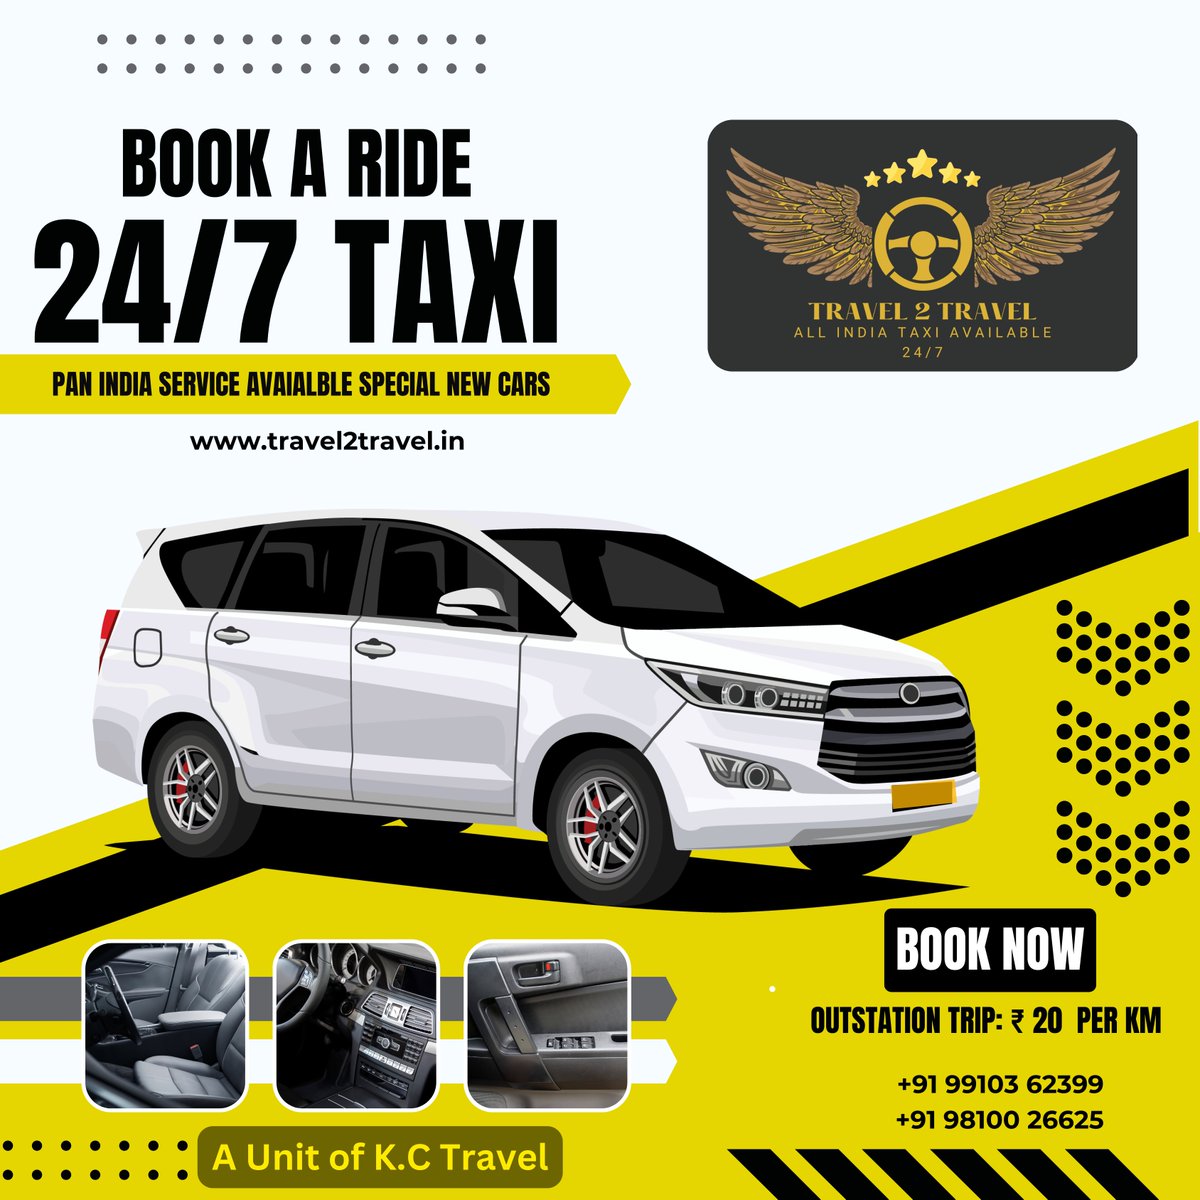 🚗 **Explore the Roads with Travel2Travel - A Unit of K.C Travel! 🌐✈️**
Book your ride now and let the adventures begin! 🌟 #Travel2Travel #KCTravel #ExploreWithUs